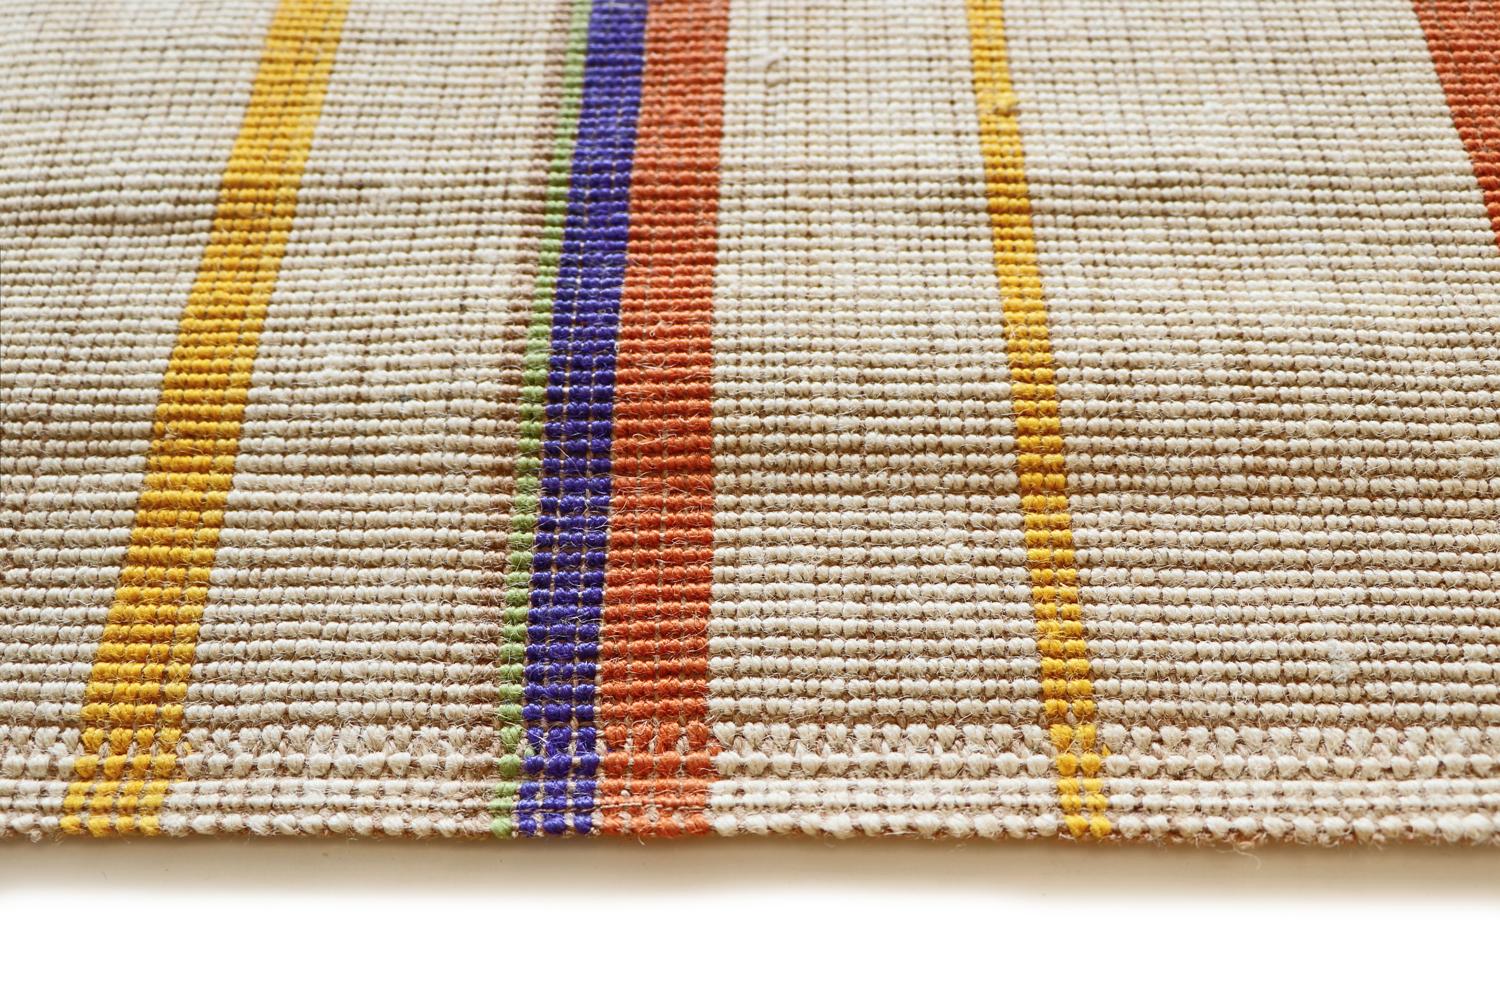 21st Cent Seasonal Style Striped Jute Rug by Deanna Comellini In Stock 200x300cm For Sale 1